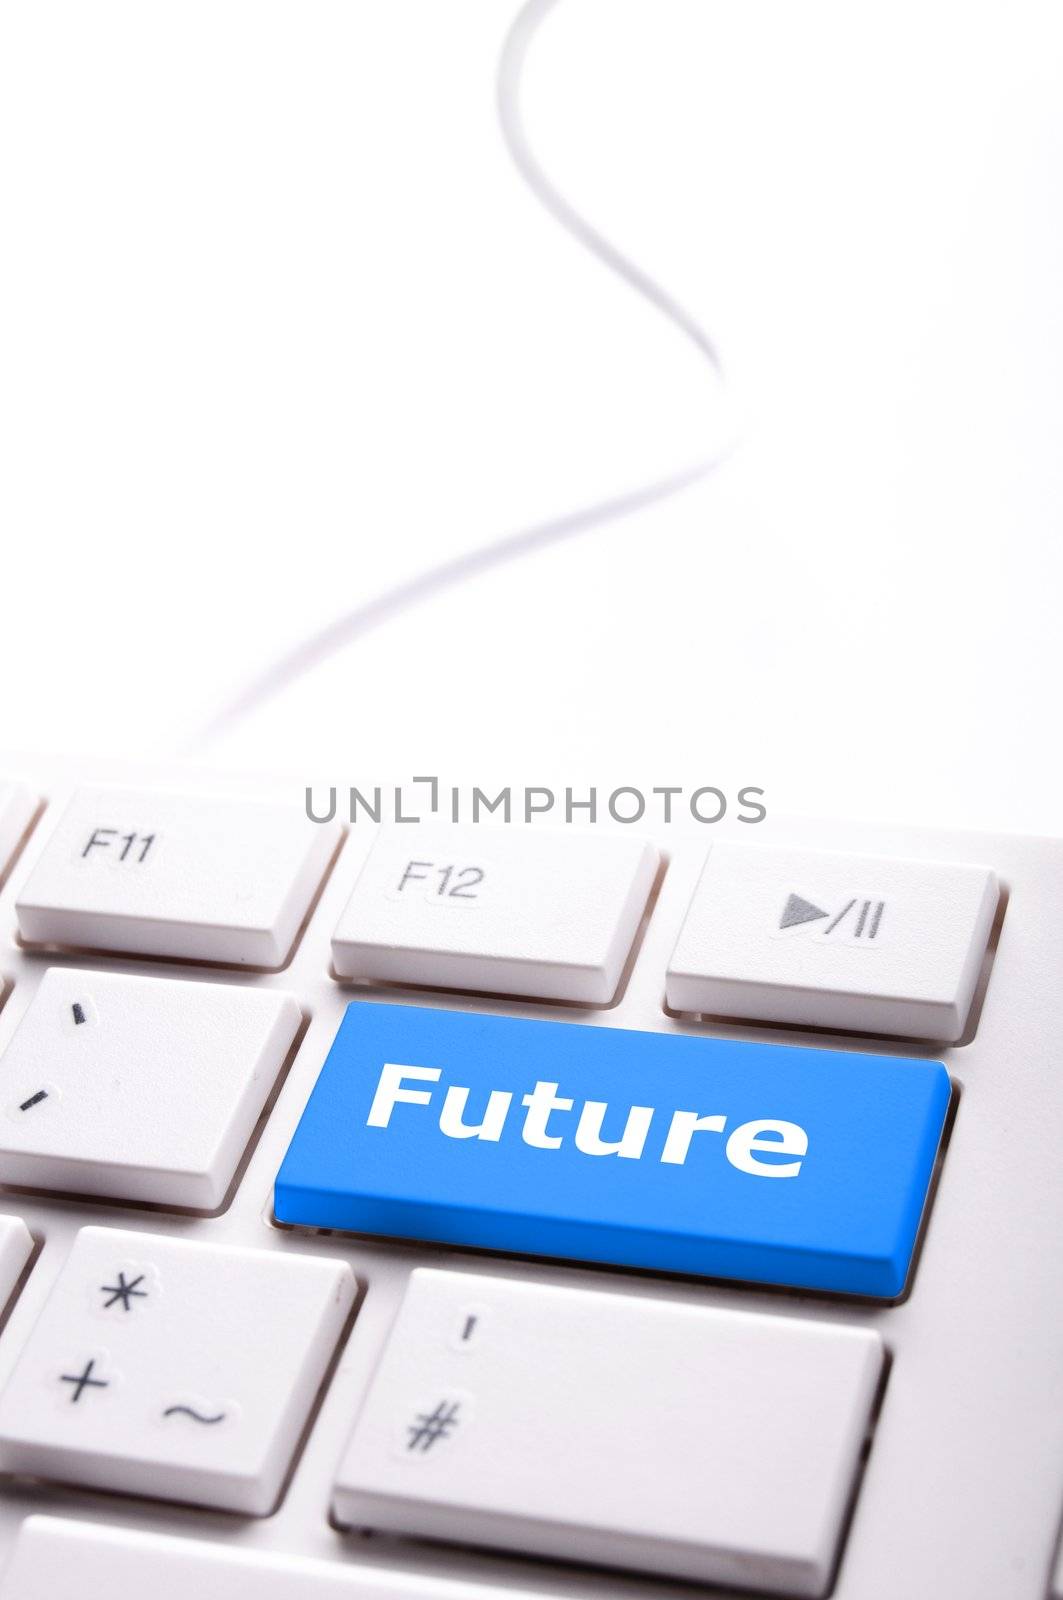 future key or keyboard showing forecast or investment concept